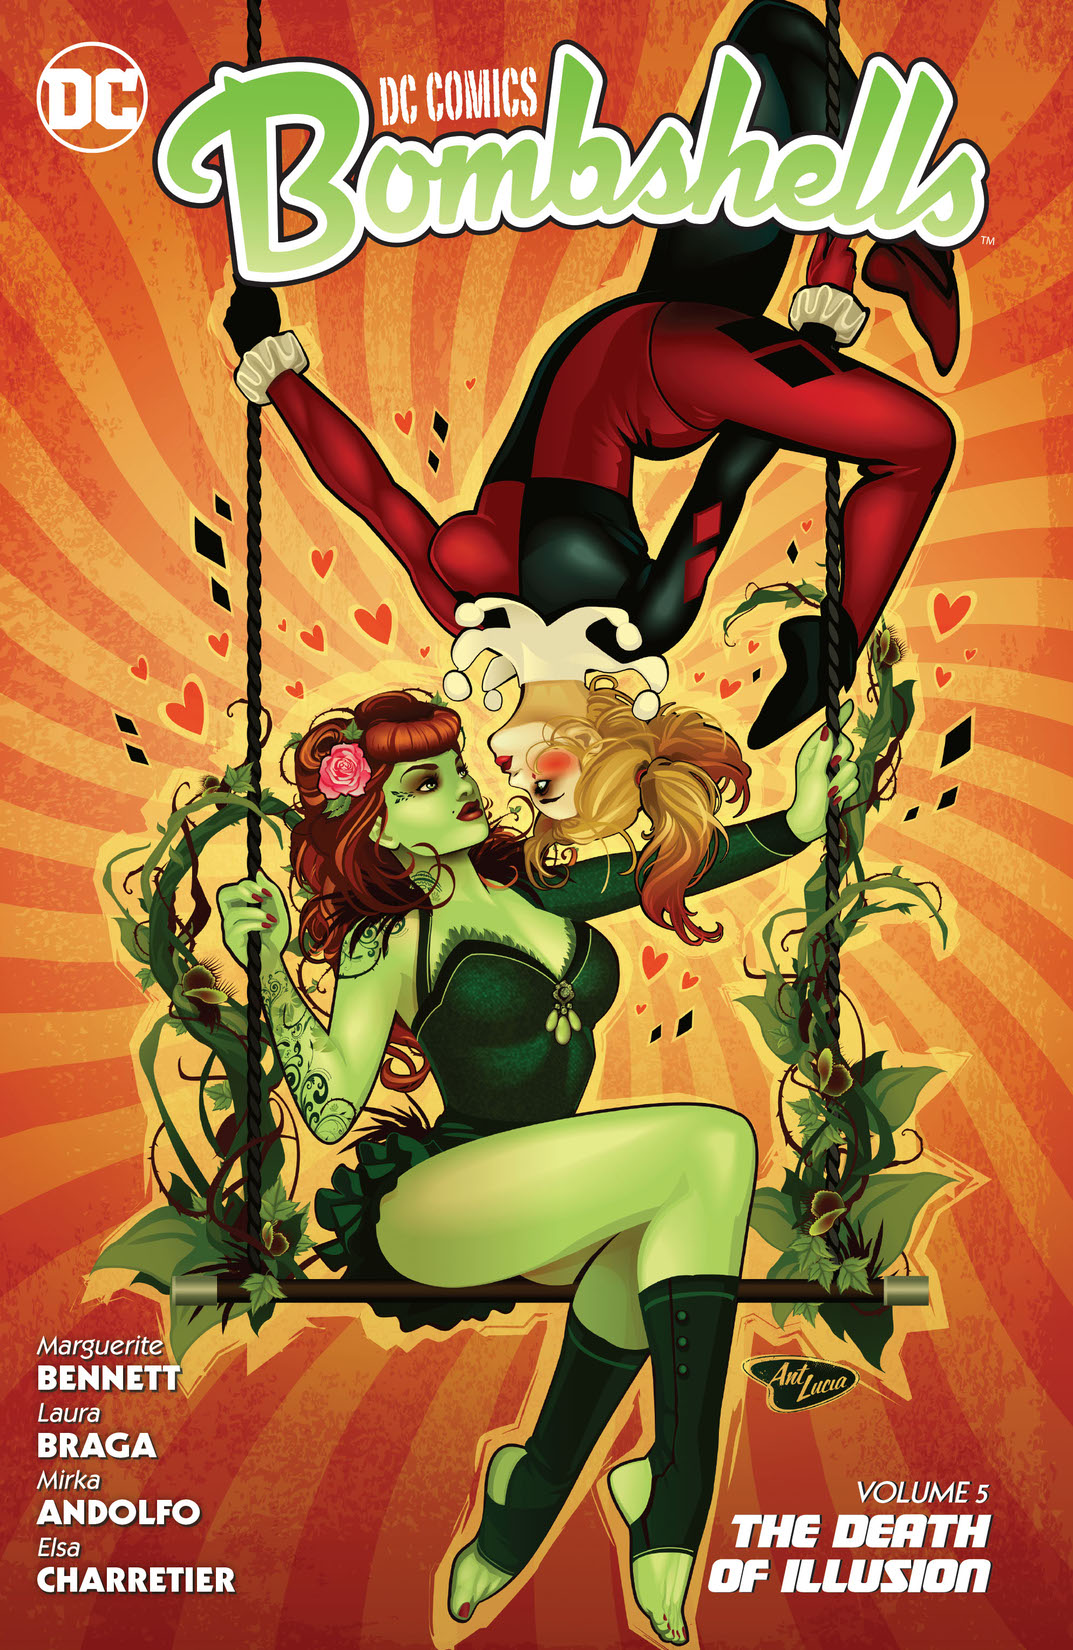 DC Comics: Bombshells Vol. 5: The Death of Illusion preview images